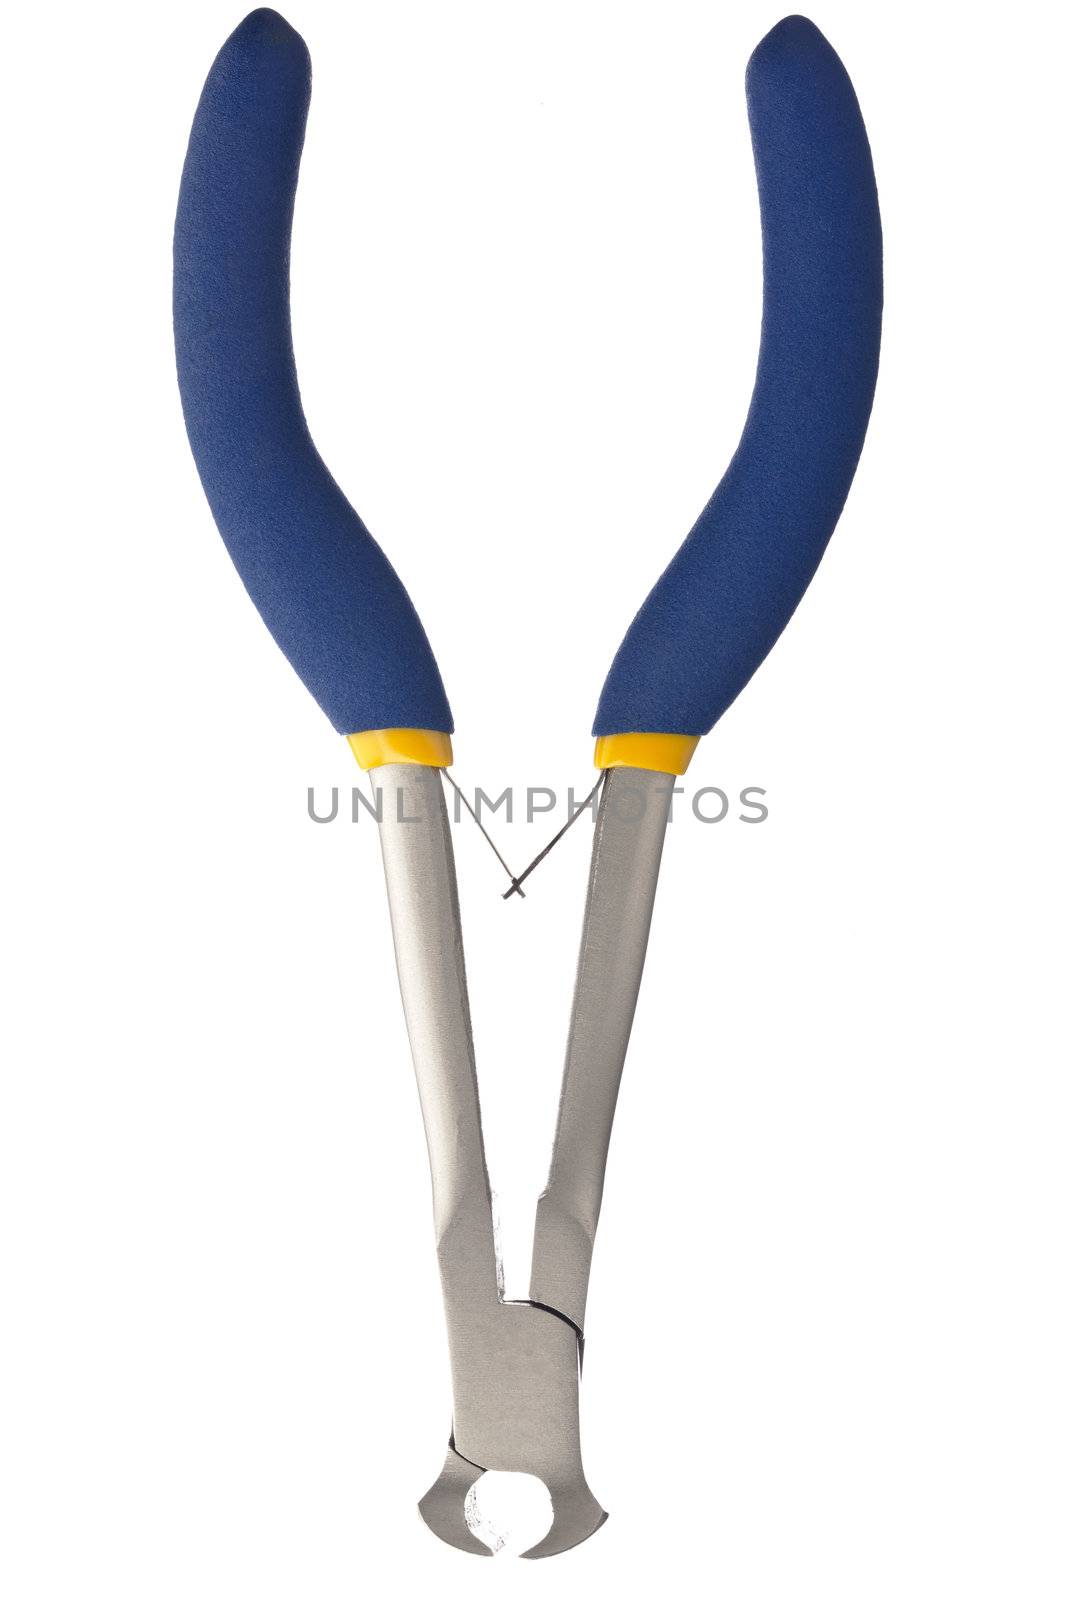 Detailed shot of wire cutter with blue plastic handle isolated on white background.